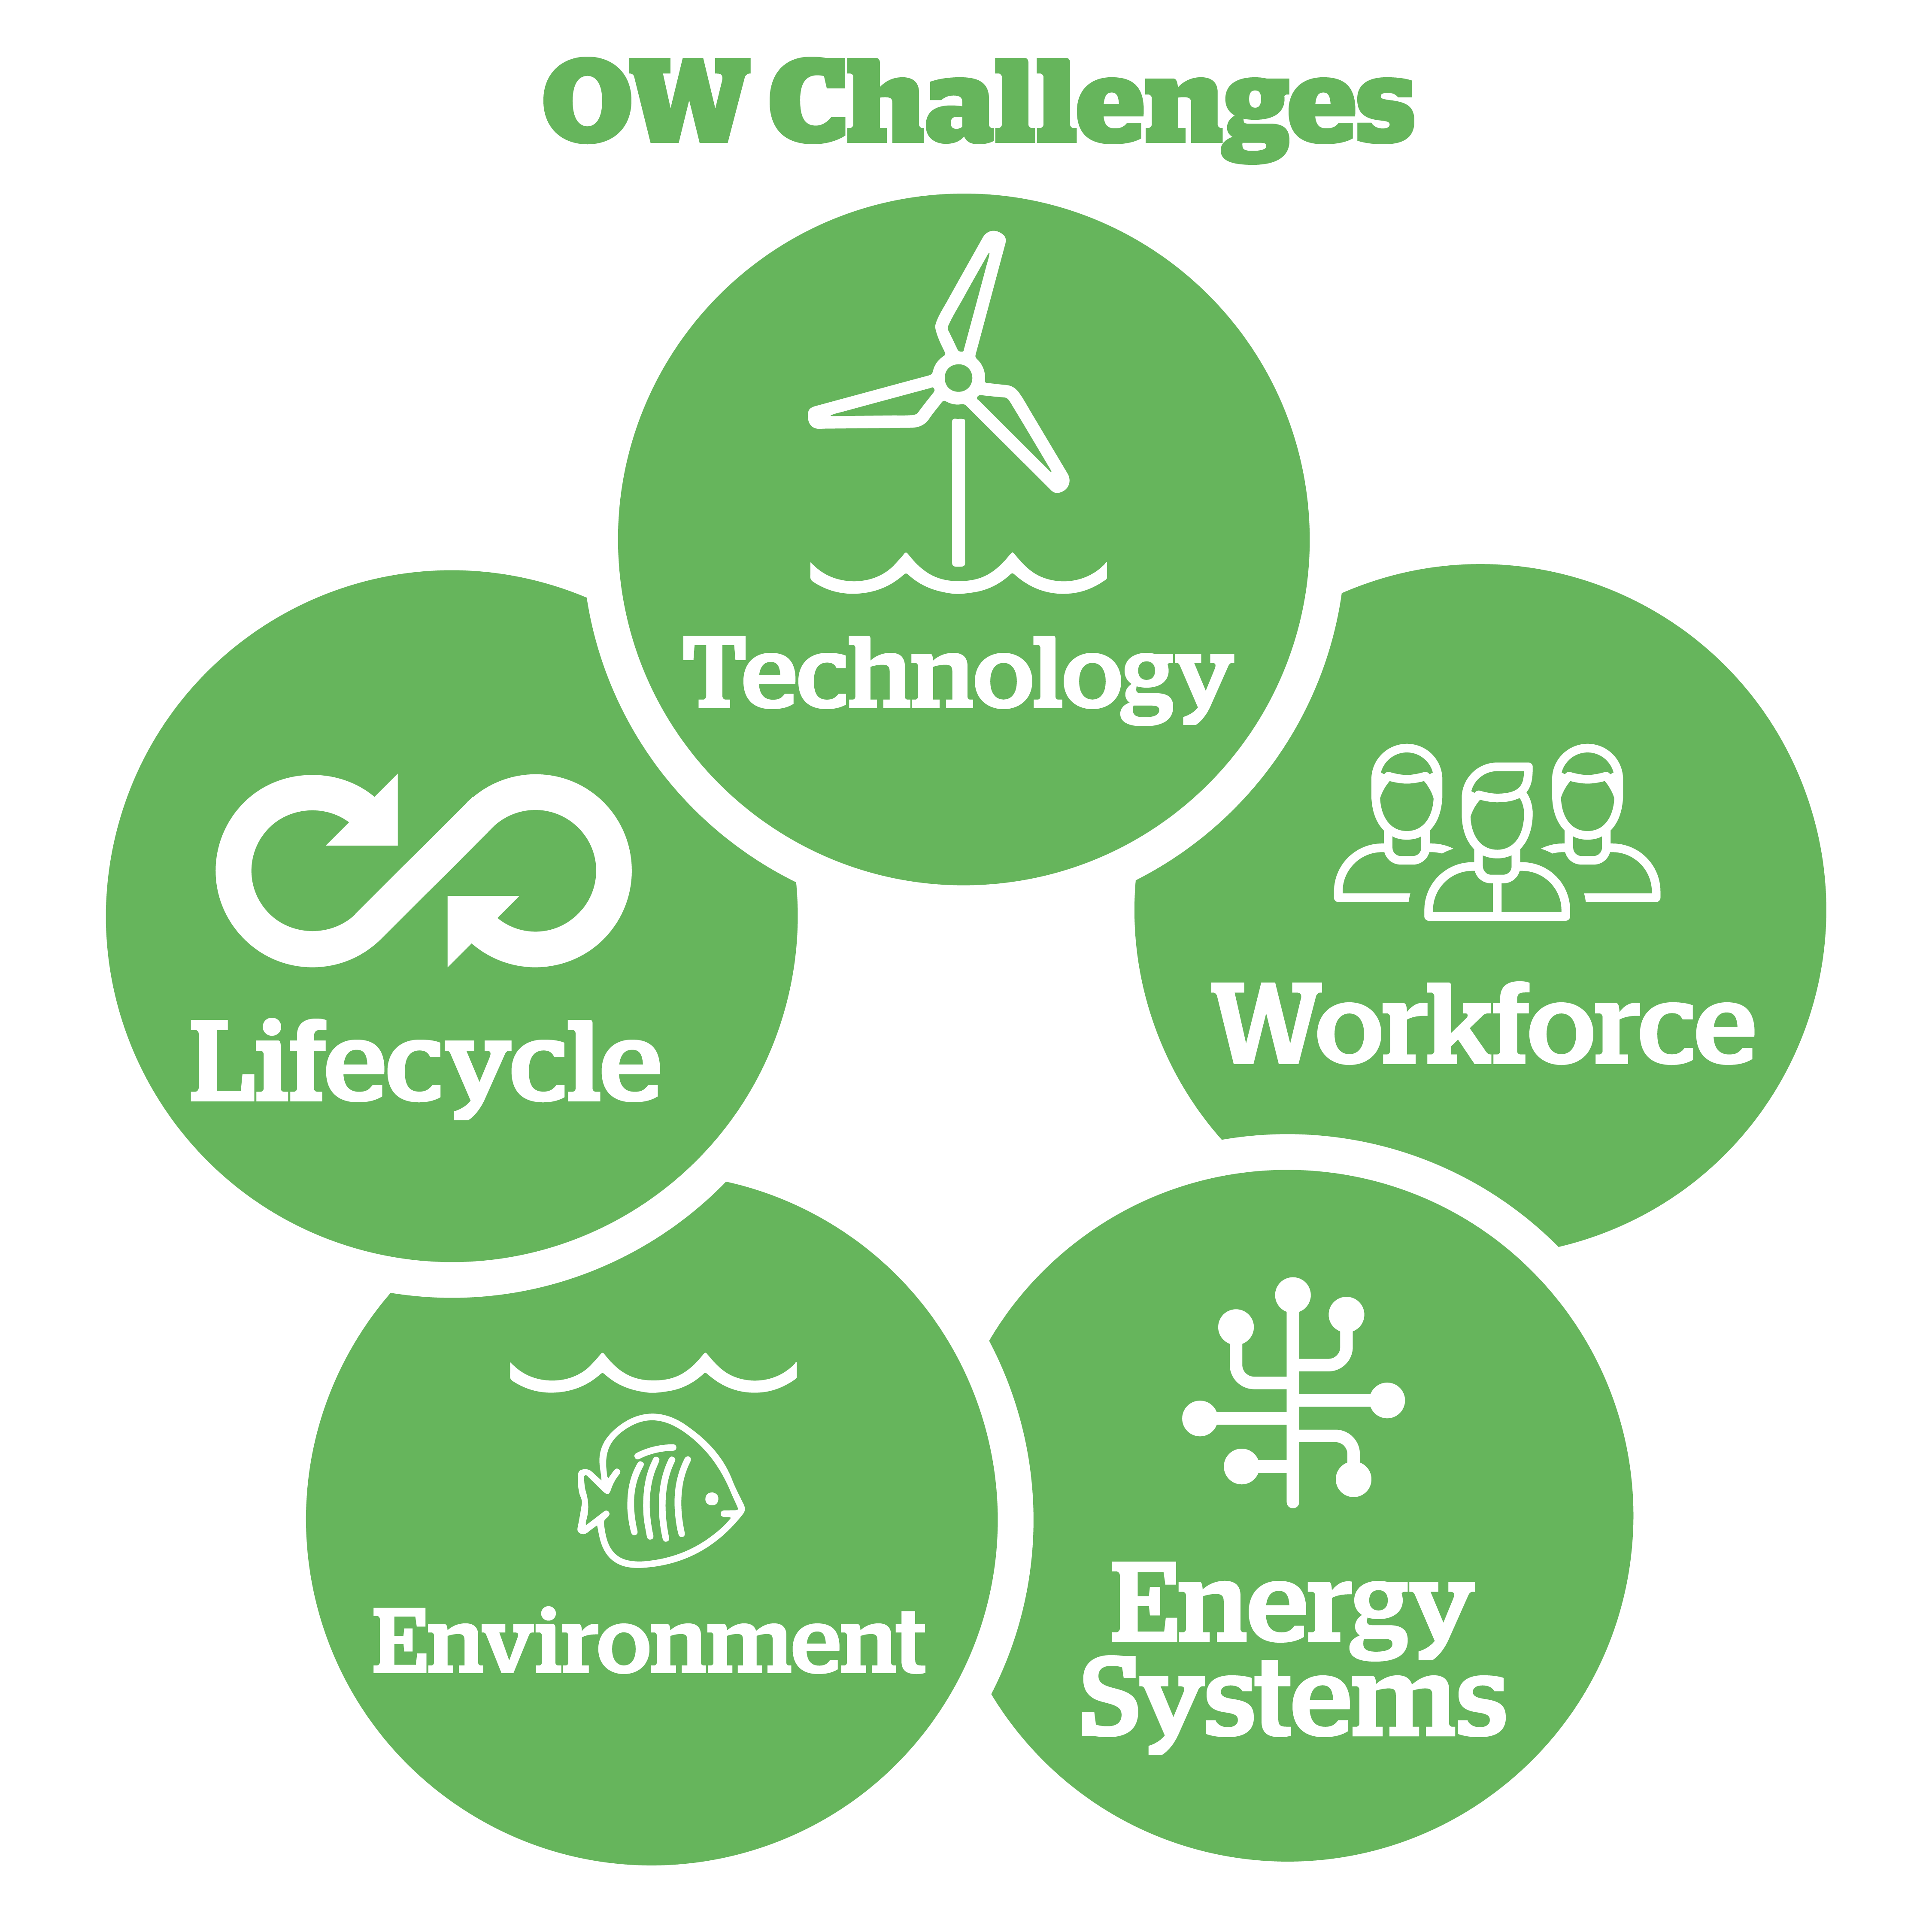 Icon summarising the five research challenges around technology, environment, lifecycle, workforce and energy systems